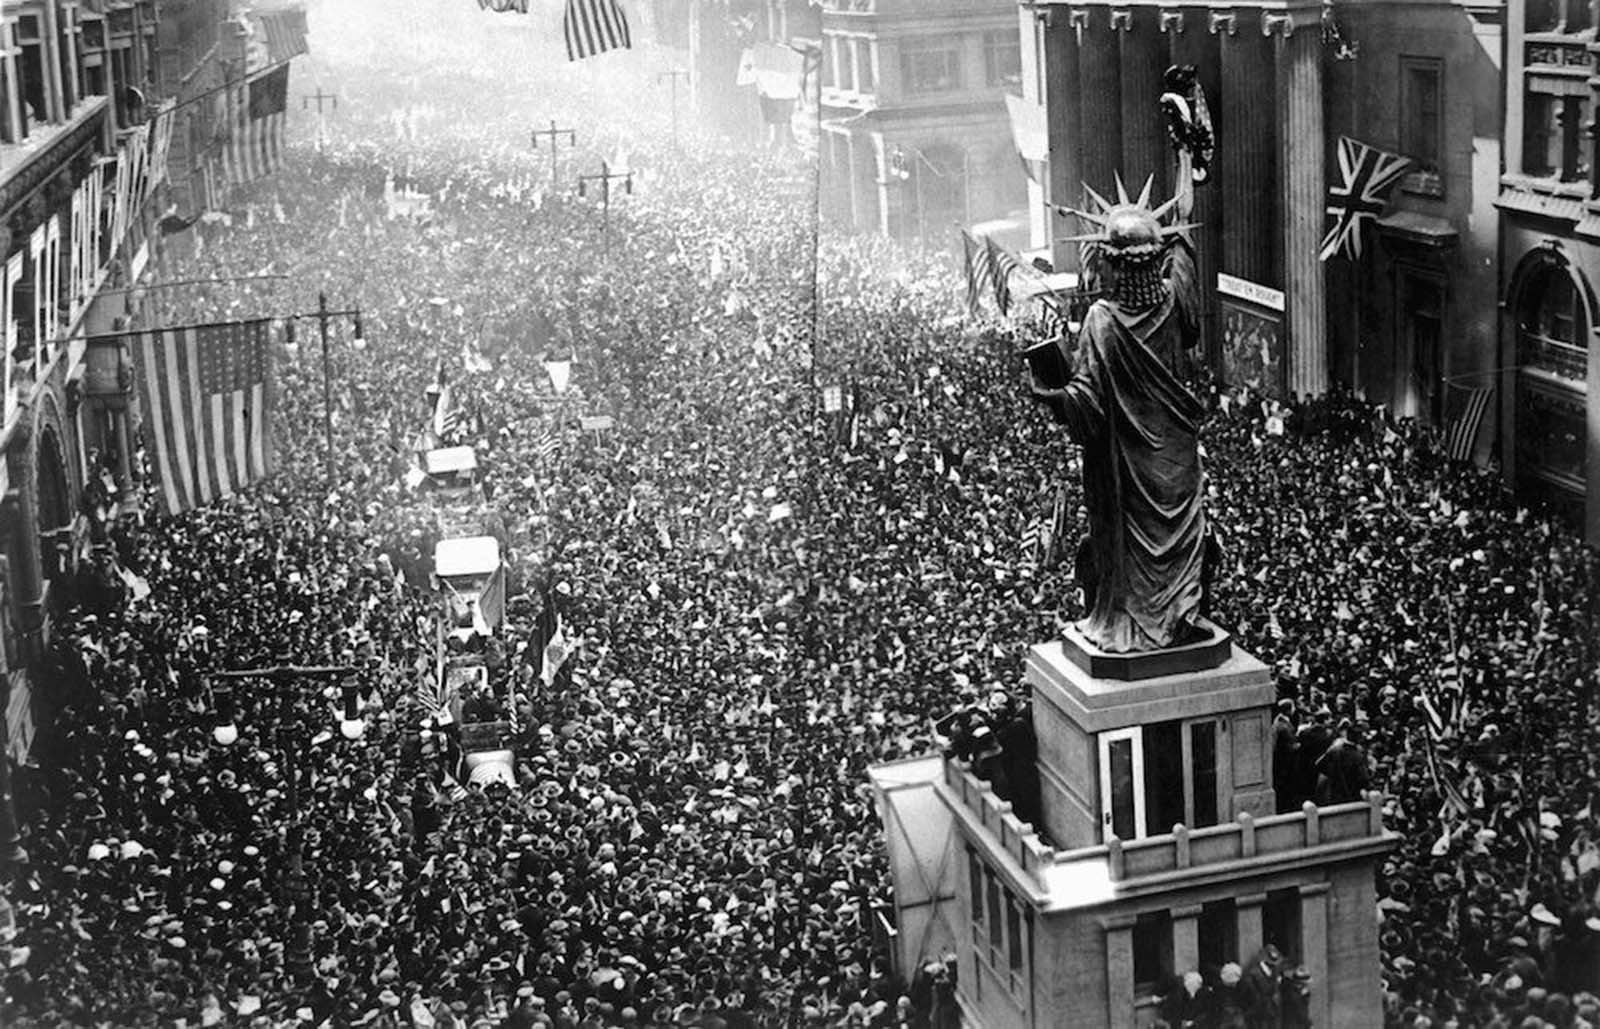 A crowd of thousands massed on Broad Street, New York, near a replica of the Statue of Liberty, to cheer as news of the armistice was announced to the public.